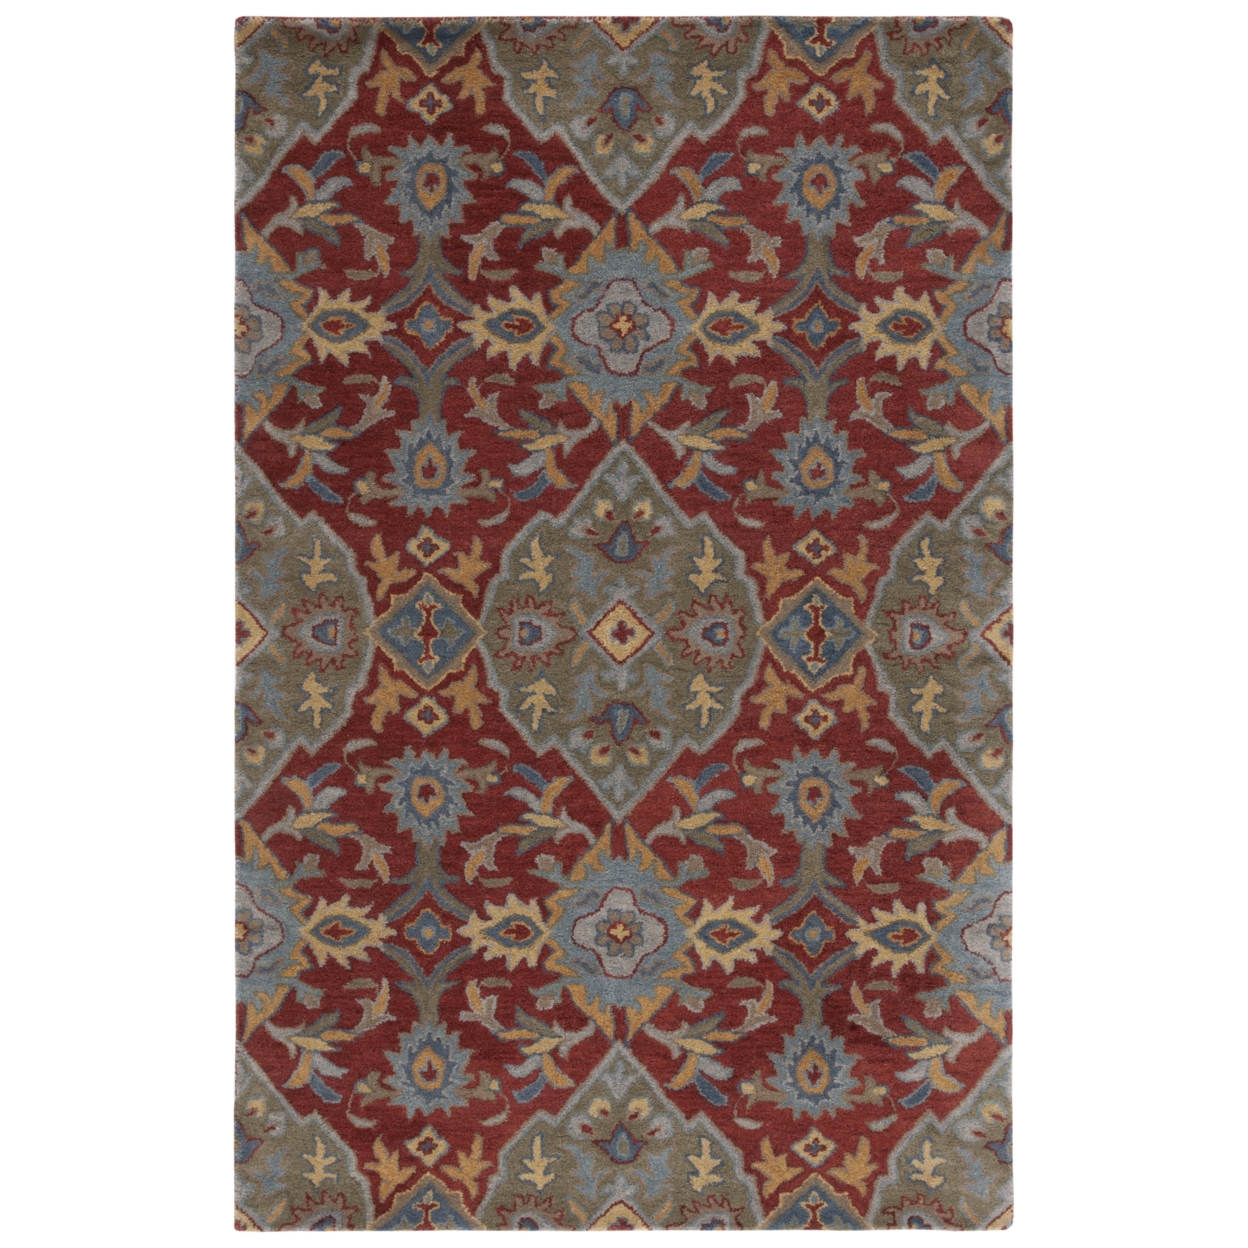 Safavieh HG653Q Heritage Red / Green - Blue / Grey, 5' X 8' Rectangle